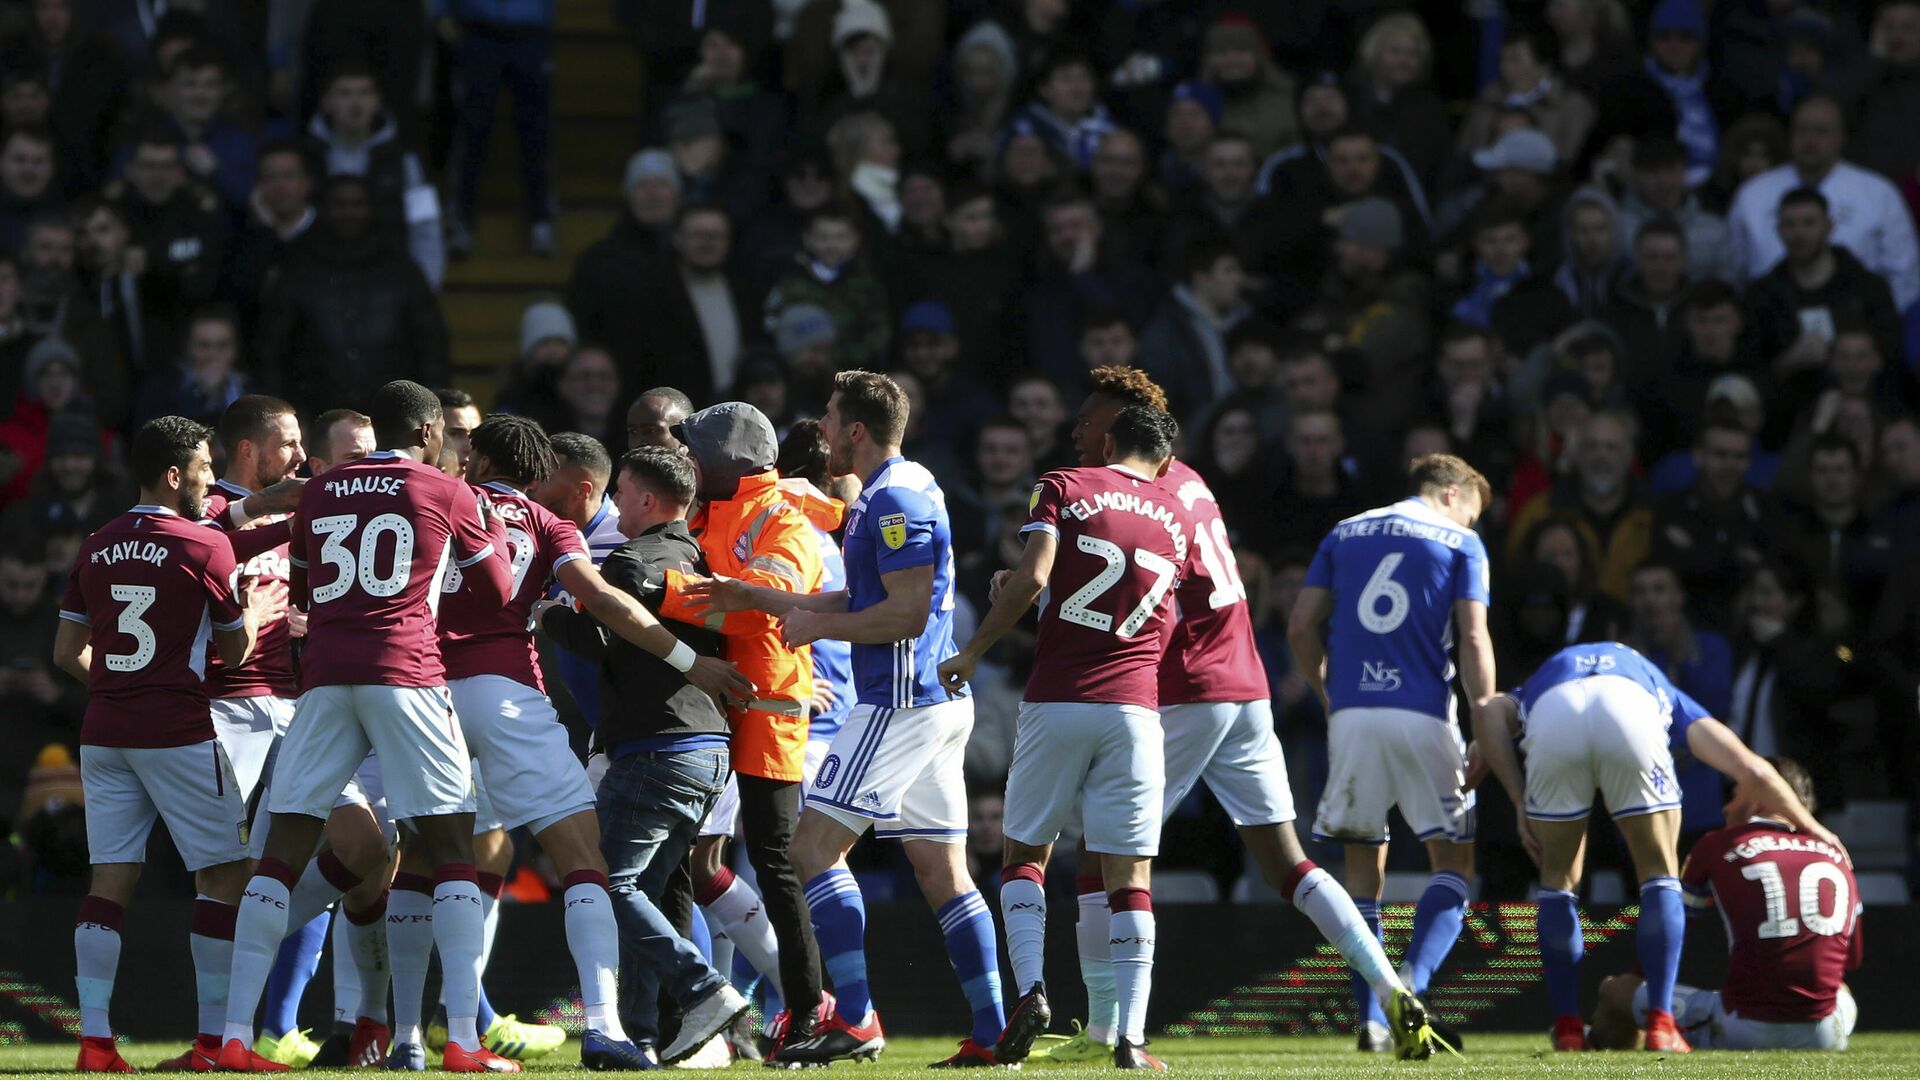 Aston Villa's Jack Grealish sits, nursing a sore head, after being punched by a Birmingham City fan at a game on 10 March 2019 - اسپوتنیک افغانستان  , 1920, 26.02.2022